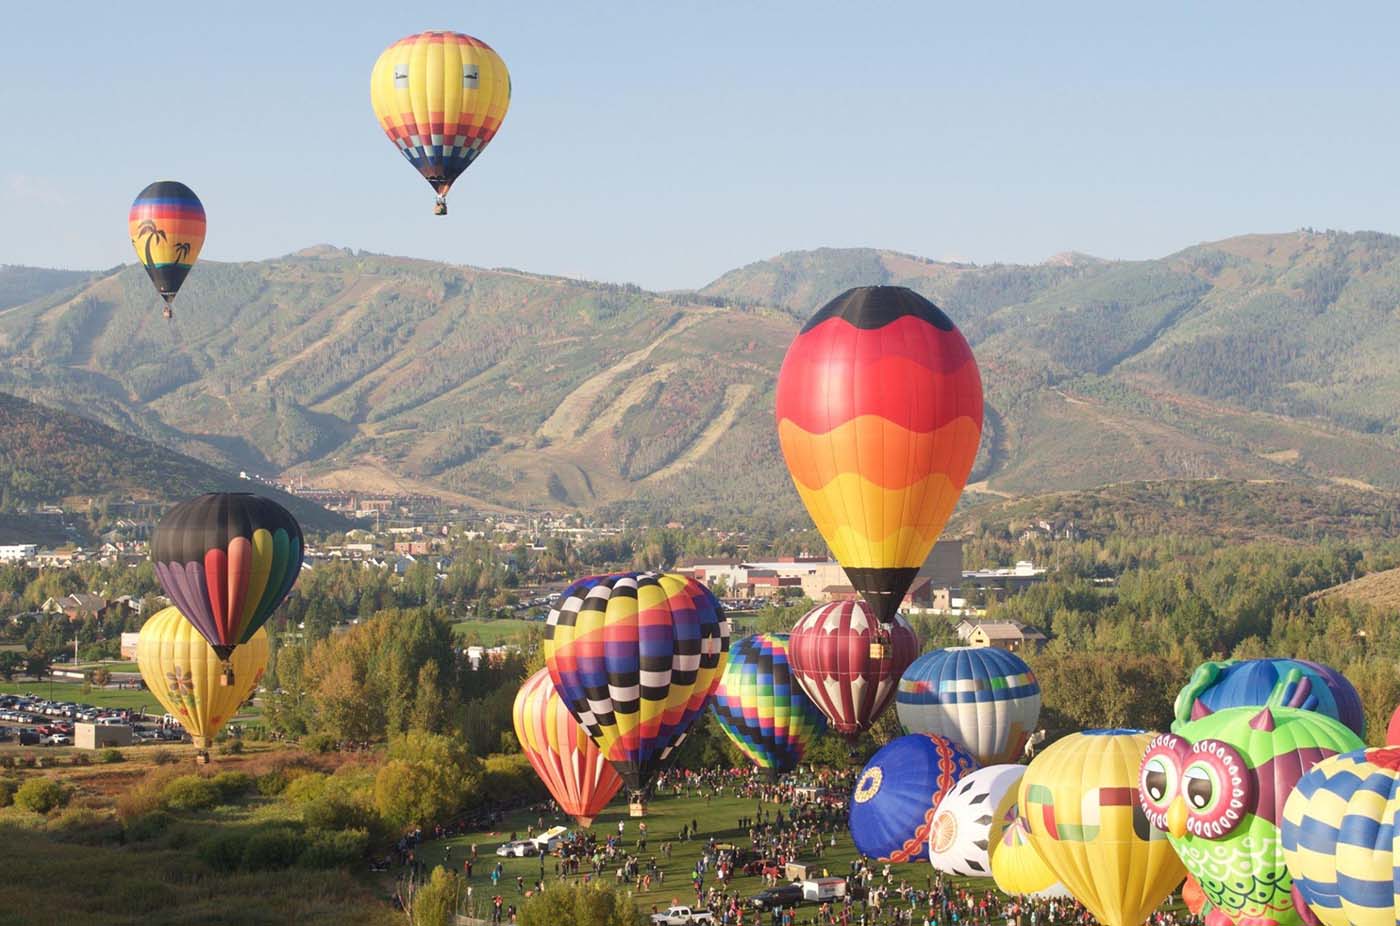 Park City: The Perfect Long Weekend Getaway